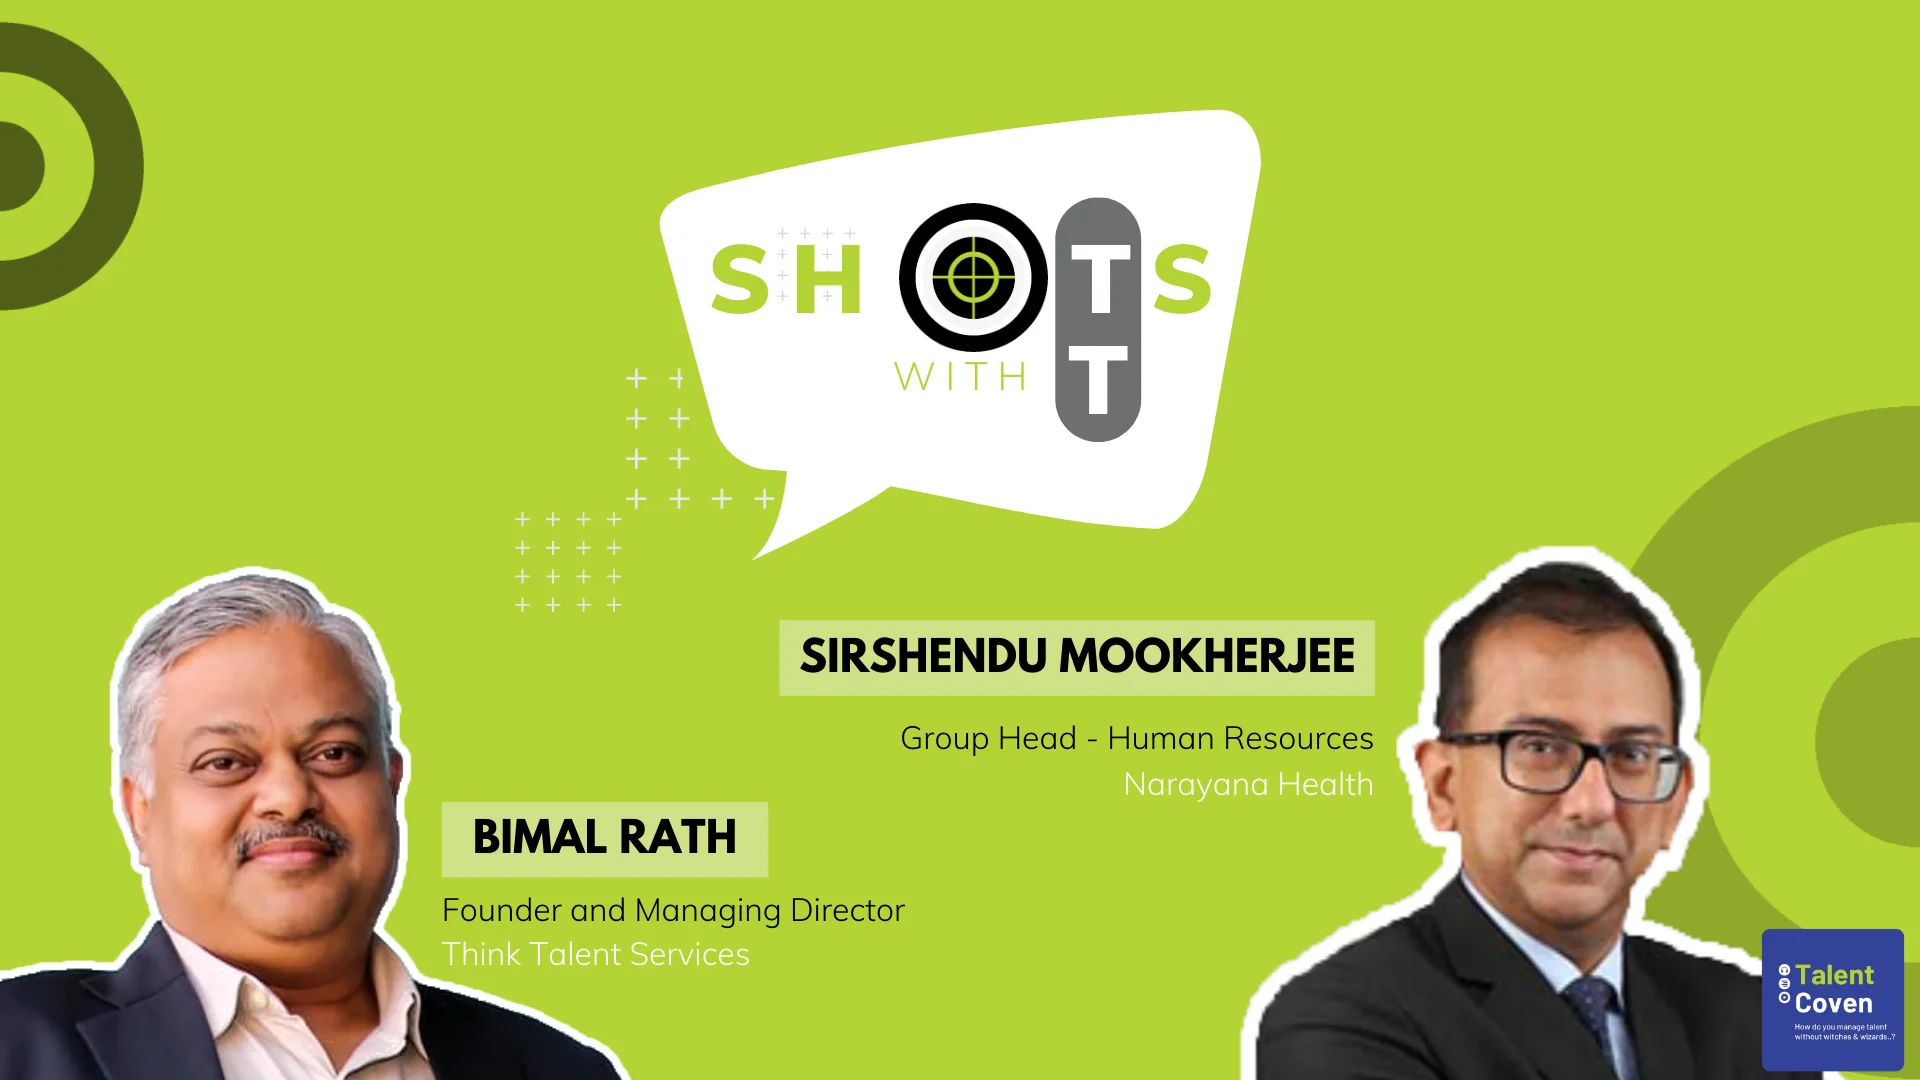 Podcast cover featuring Sirshendu Mookherjee discussing Perspectives on Talent in Healthcare Industry